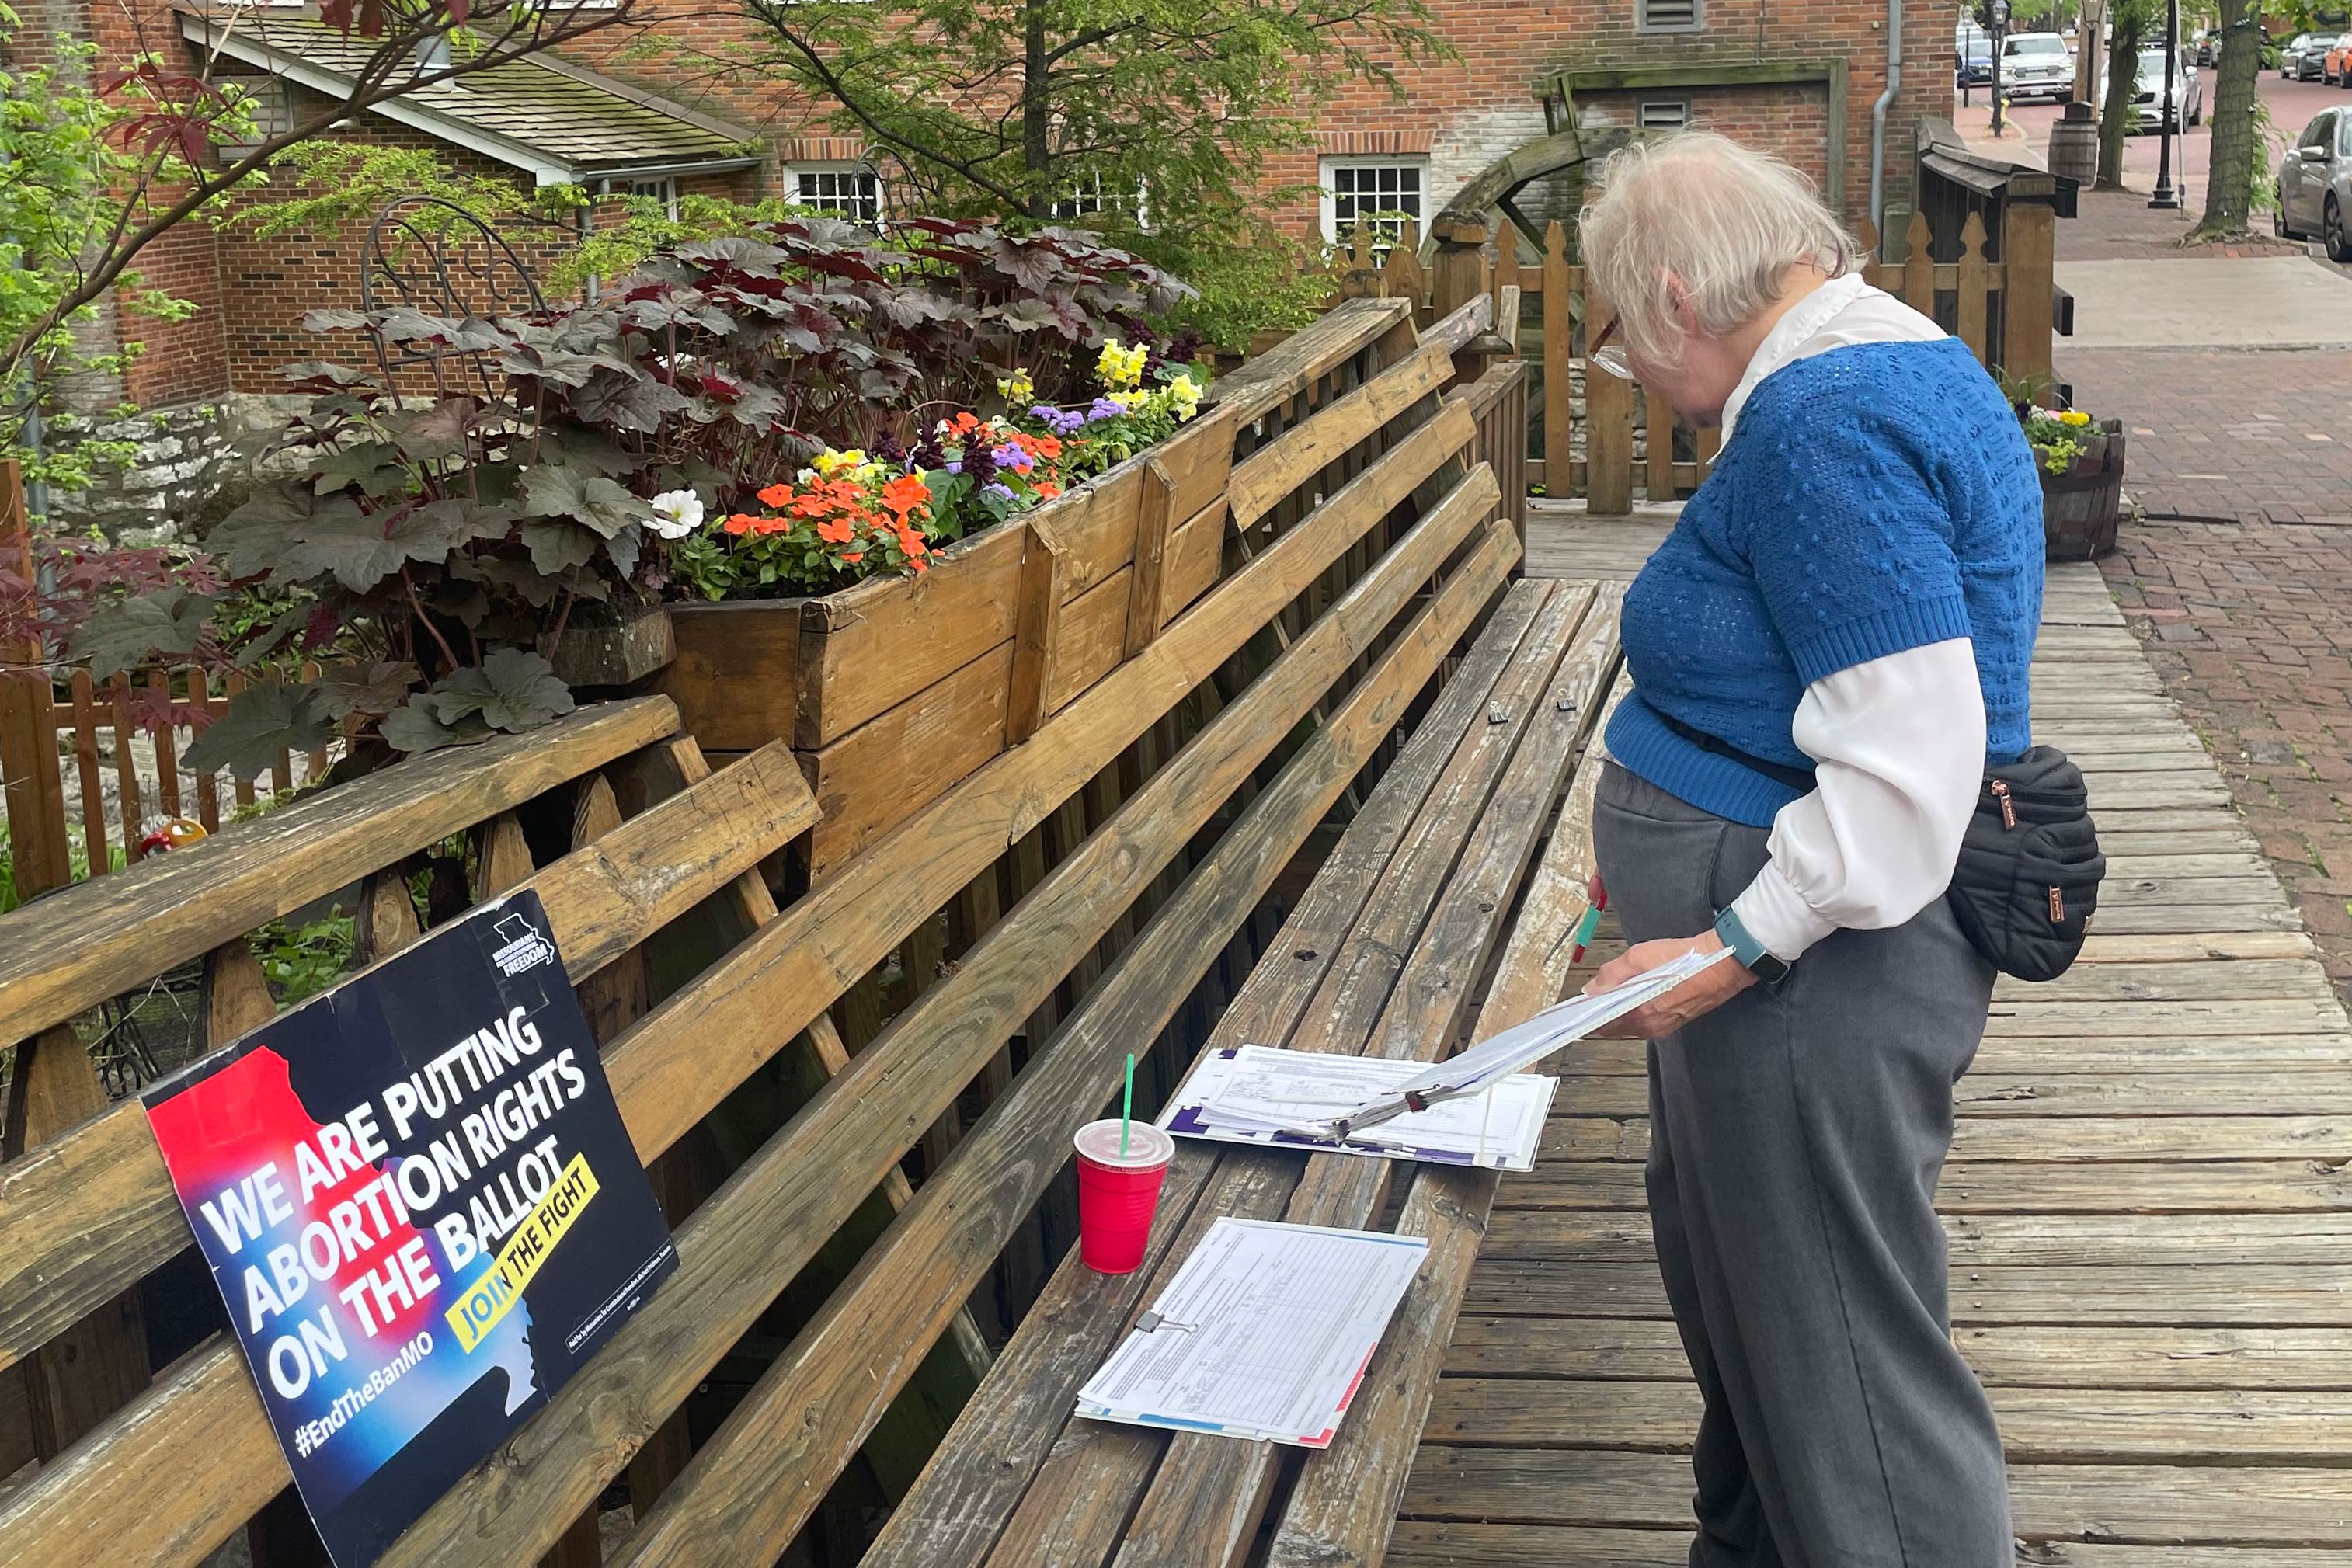 Image of a woman looking at a bench with papers and a sign that reads, "We're putting abortion rights on the ballot. Join the fight."